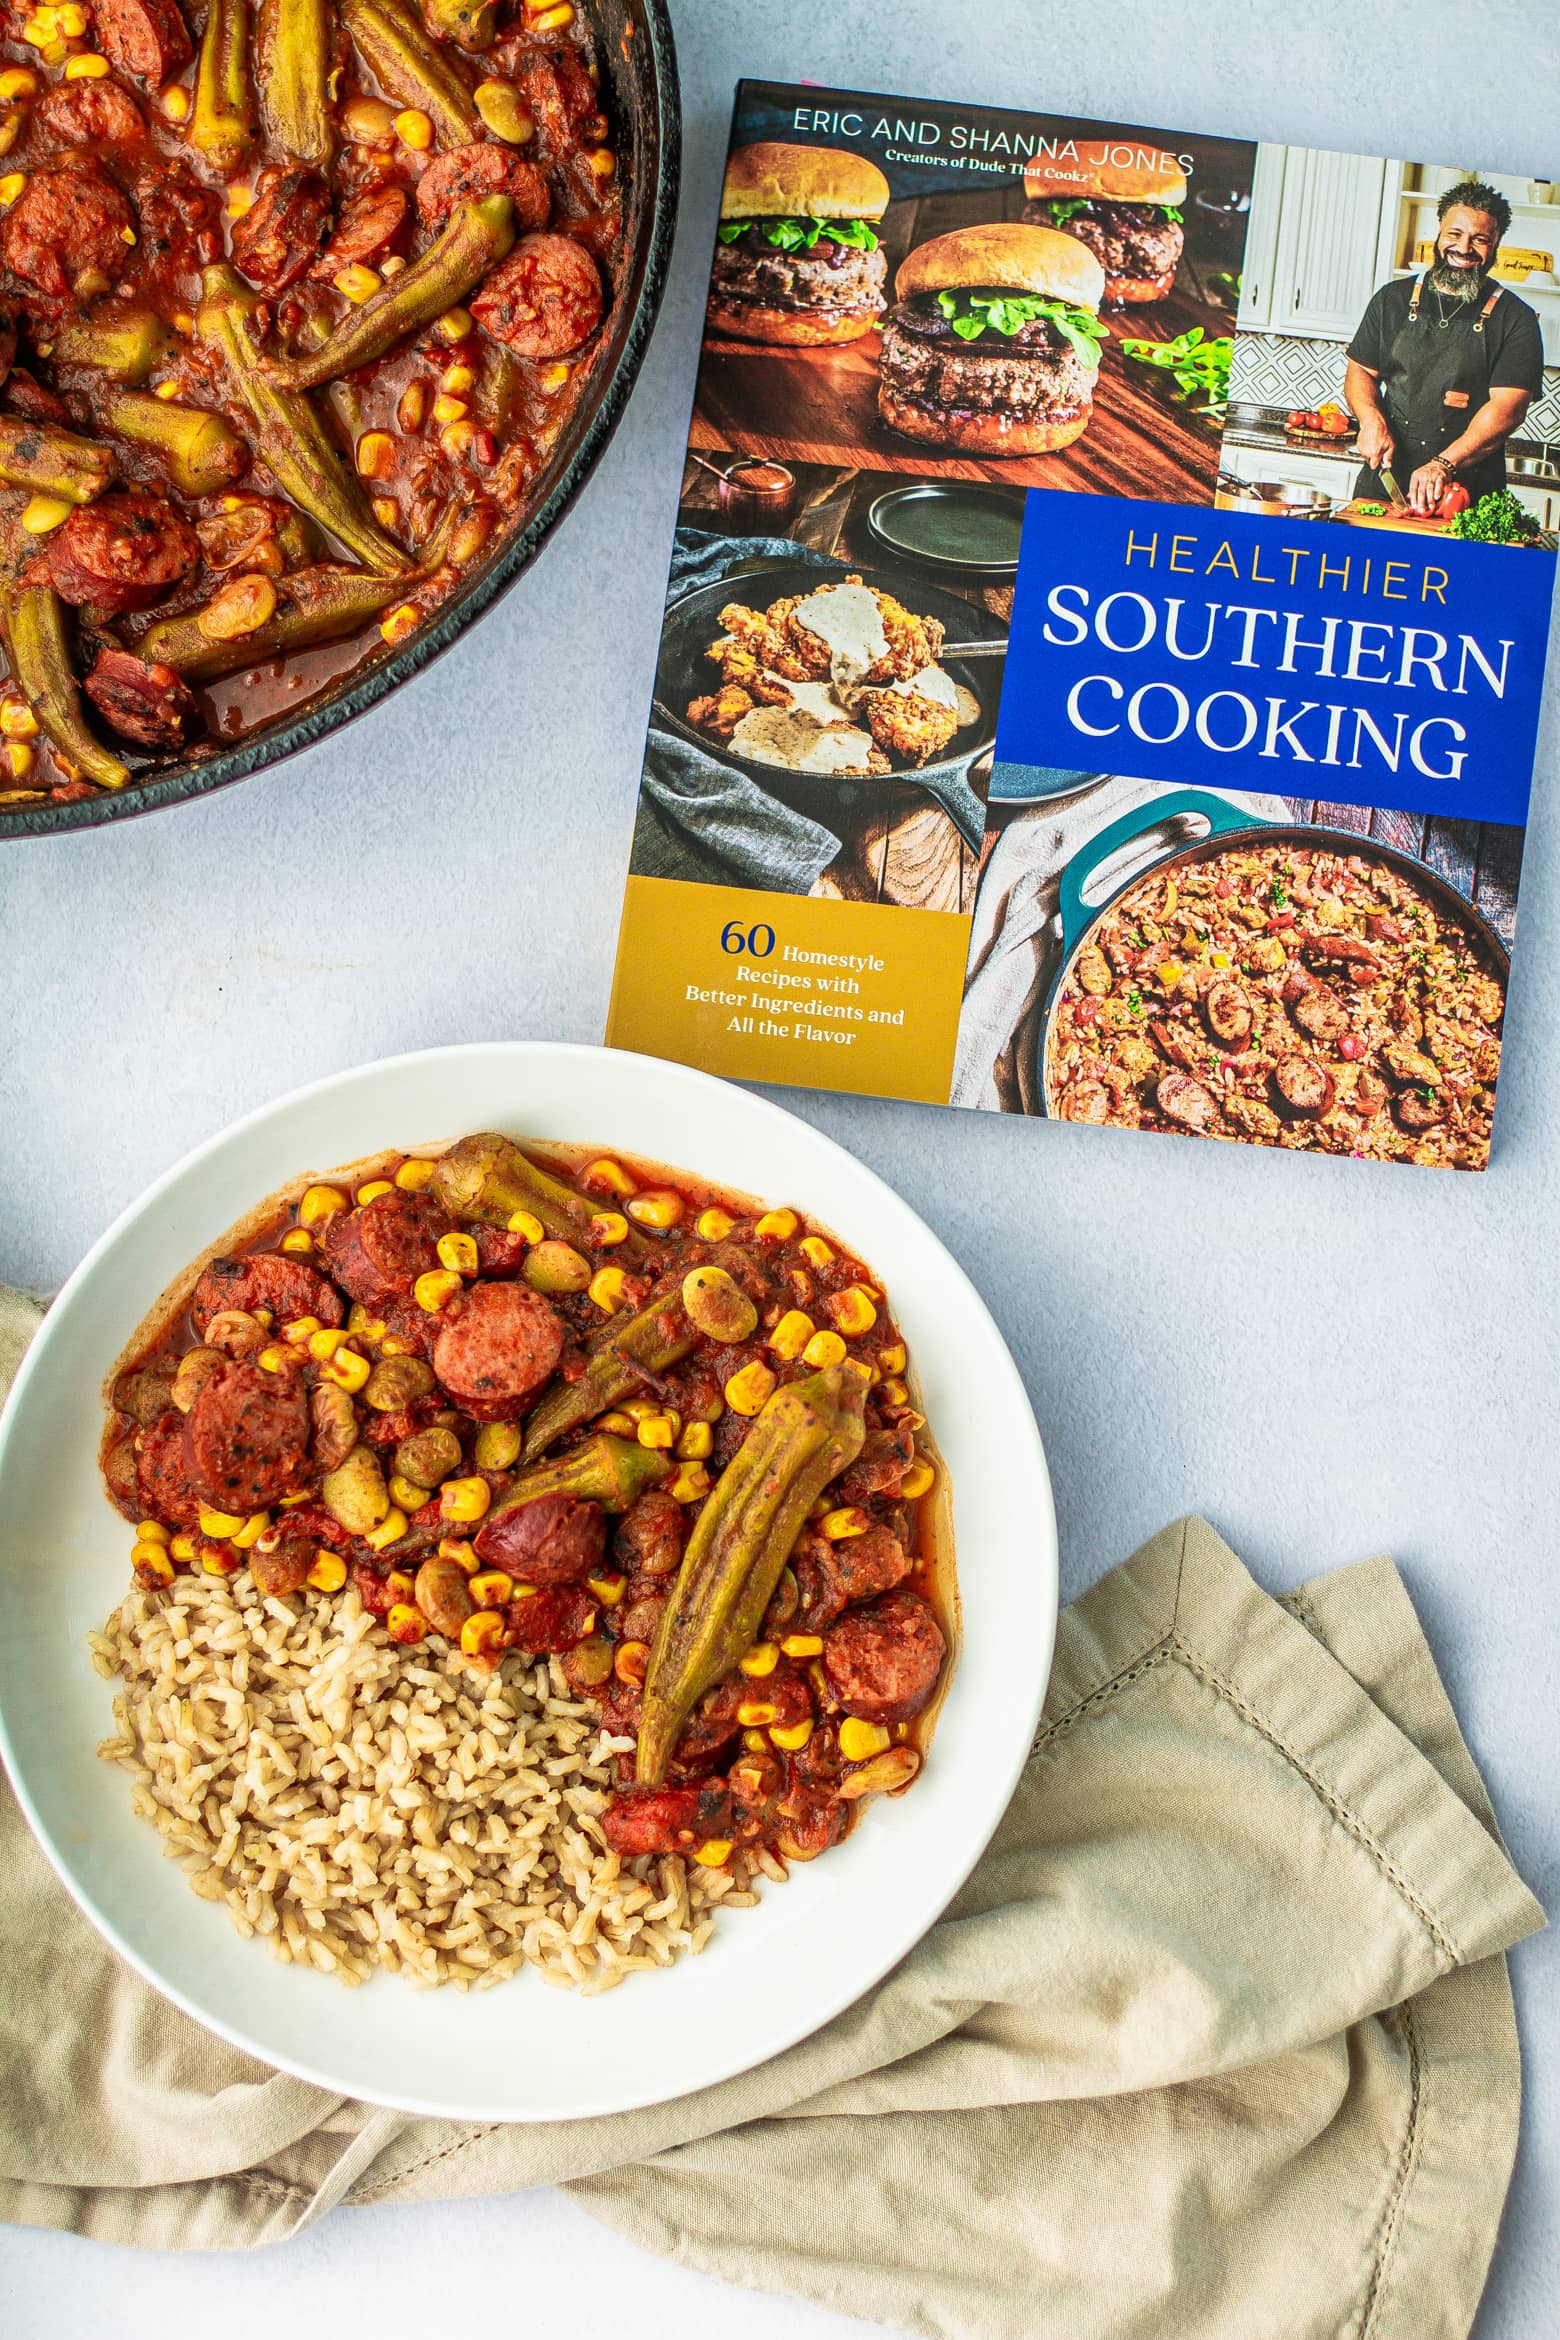 Overhead shoot of Creole Okra & Tomatoes in a bowl along with Healthier Southern Cooking by Eric & Shanna Jones cookbook